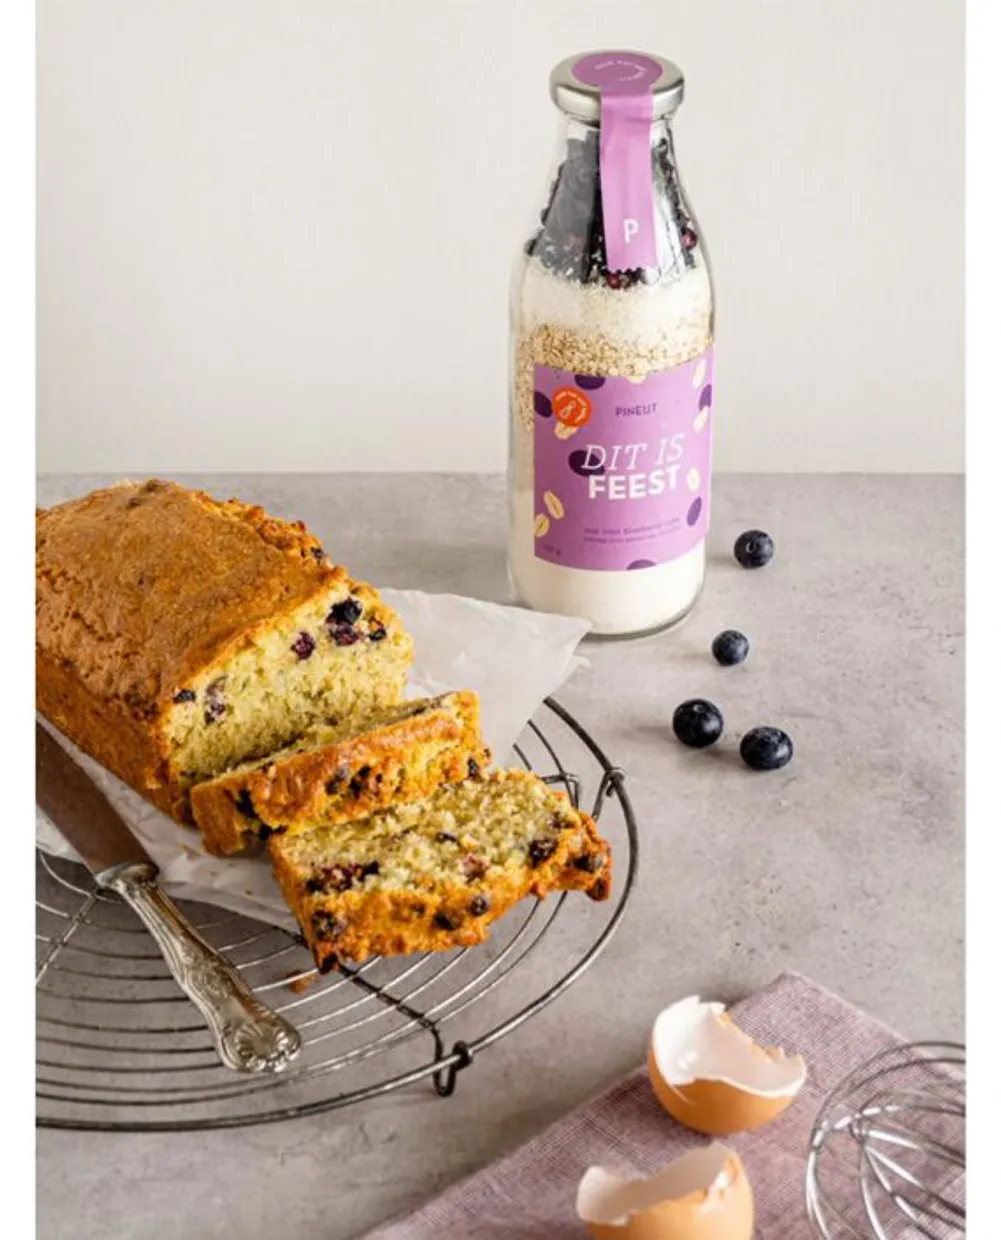 Blueberry (cup)cake ‘Dit is feest’